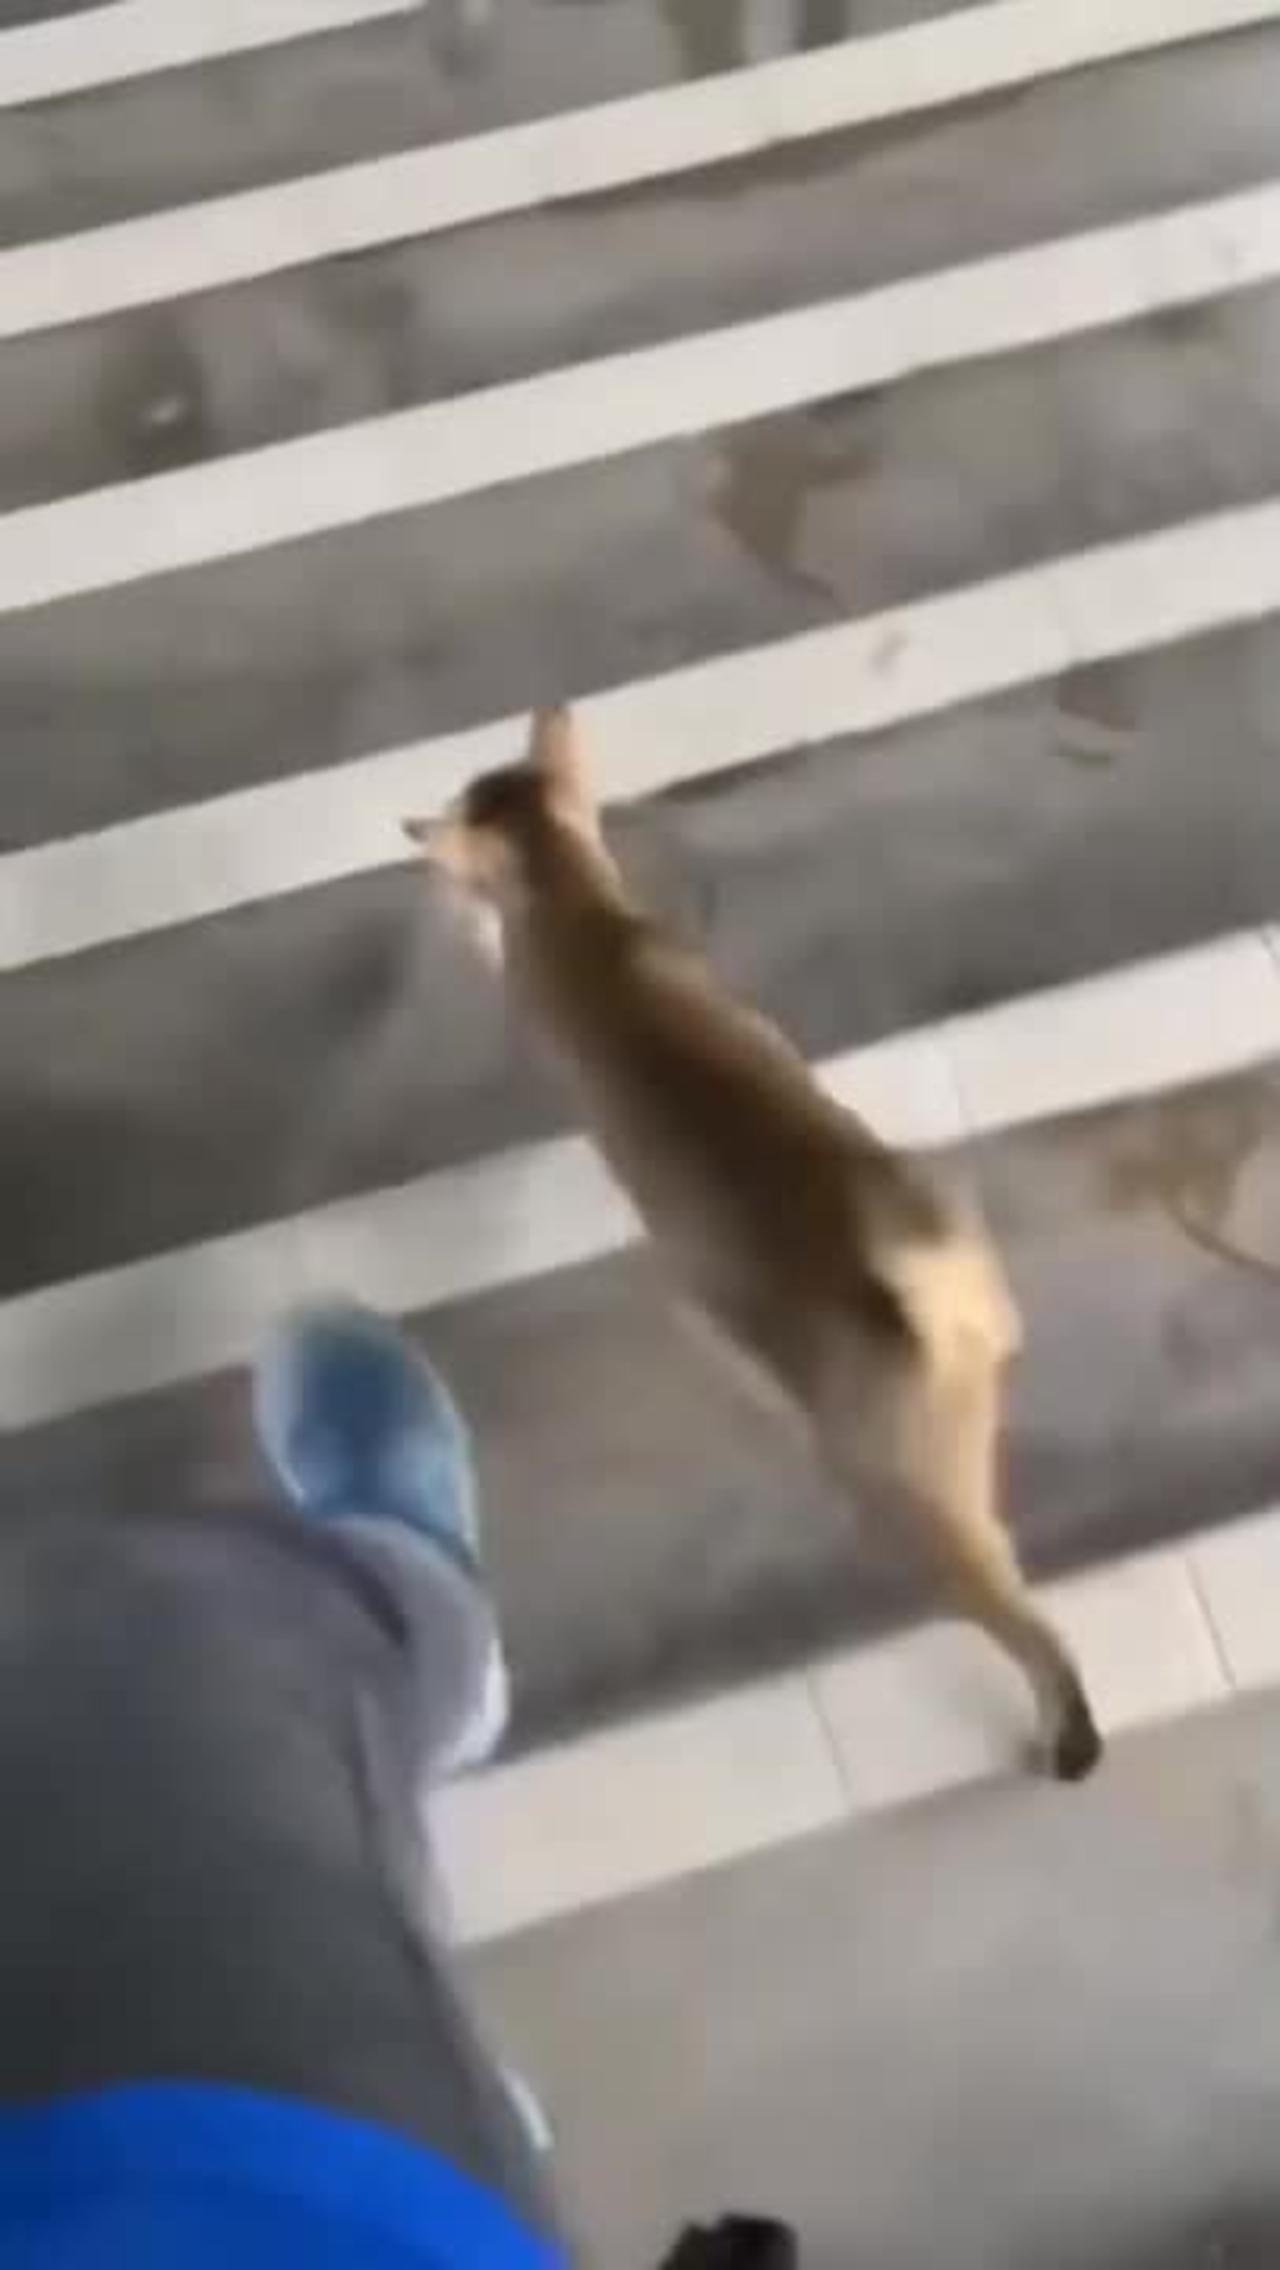 Kitty trying to get a pet